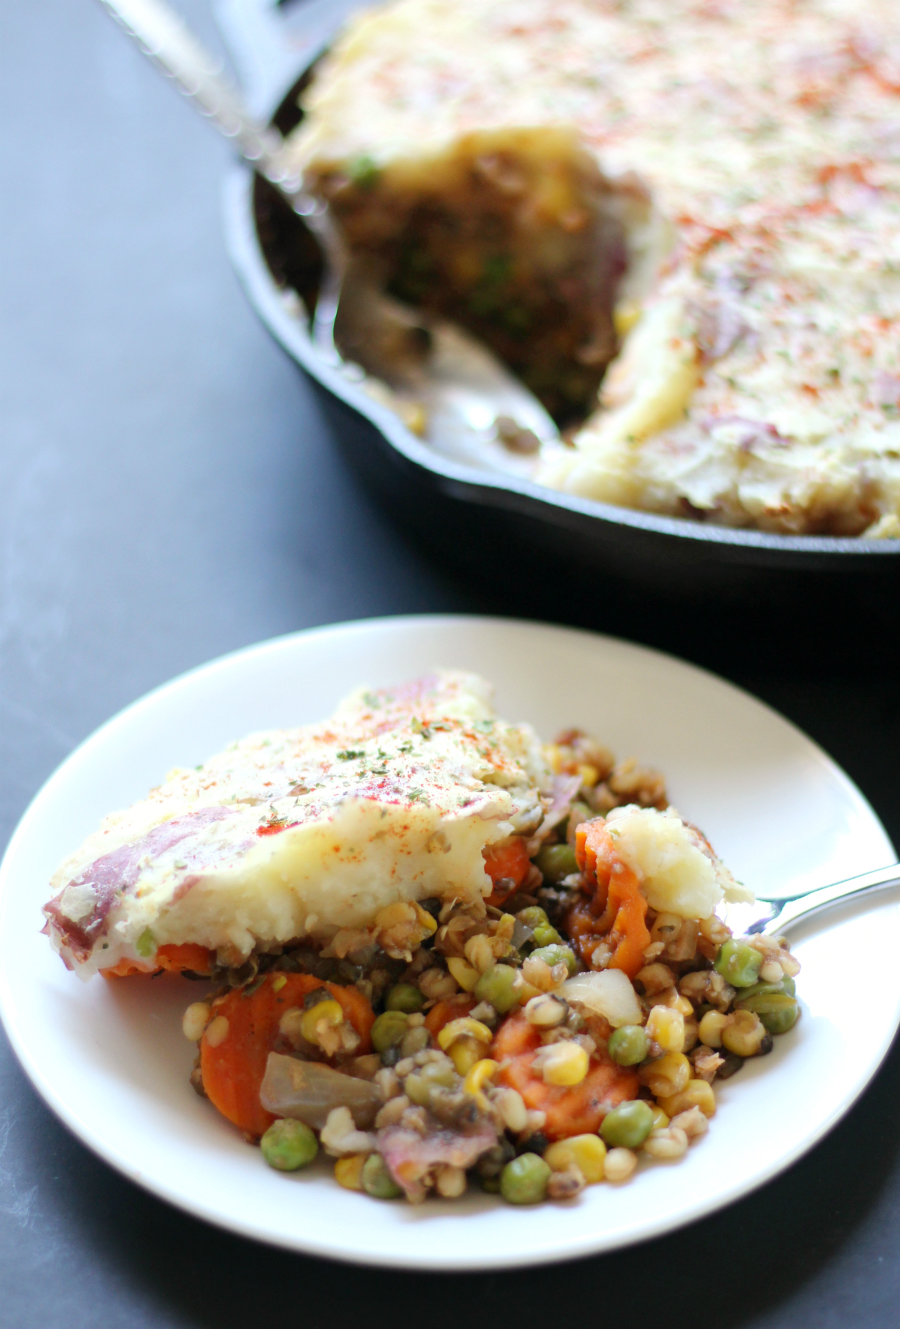 Rustic Mung Bean Shepherd's Pie (Gluten-Free, Vegan) | Strength and Sunshine @RebeccaGF666 The traditional and budget-friendly Irish recipe with a twist! This meatless Rustic Mung Bean Shepherd's Pie is gluten-free, vegan, and allergy-friendly. Whether you're in need of a easy family dinner to serve a crowd of just need some healthy comfort food, this cottage pie is the way to go!